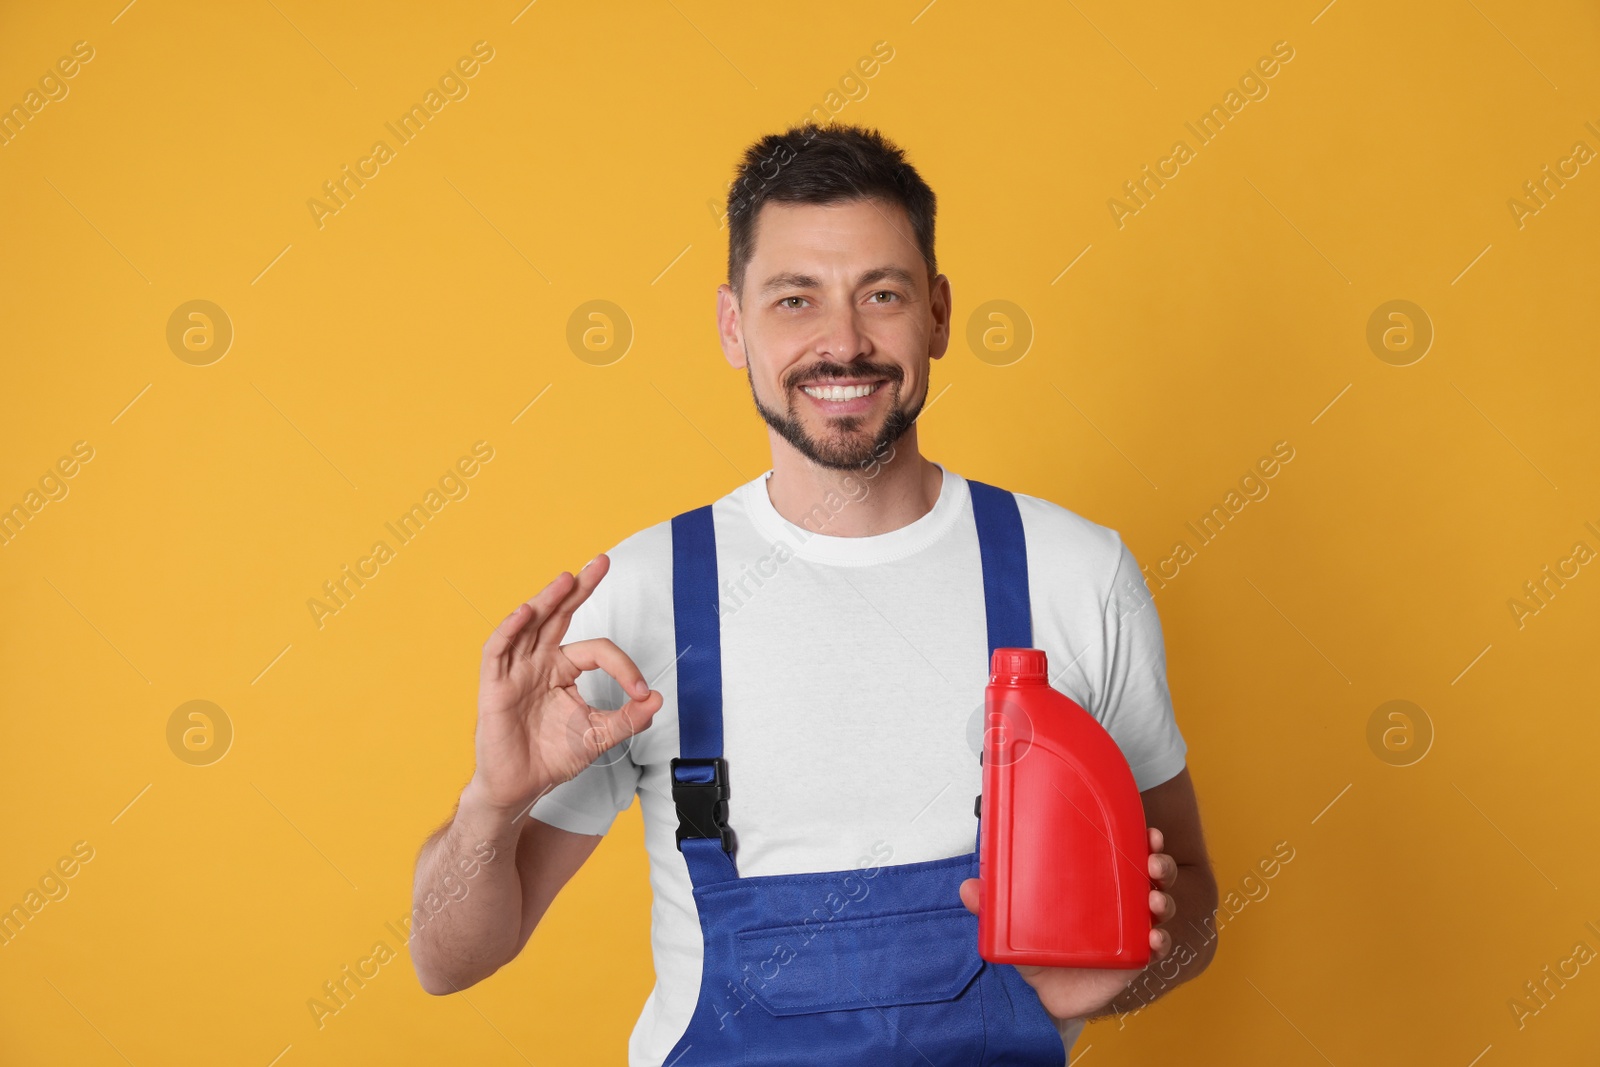 Photo of Man holding red container of motor oil and showing OK gesture on orange background